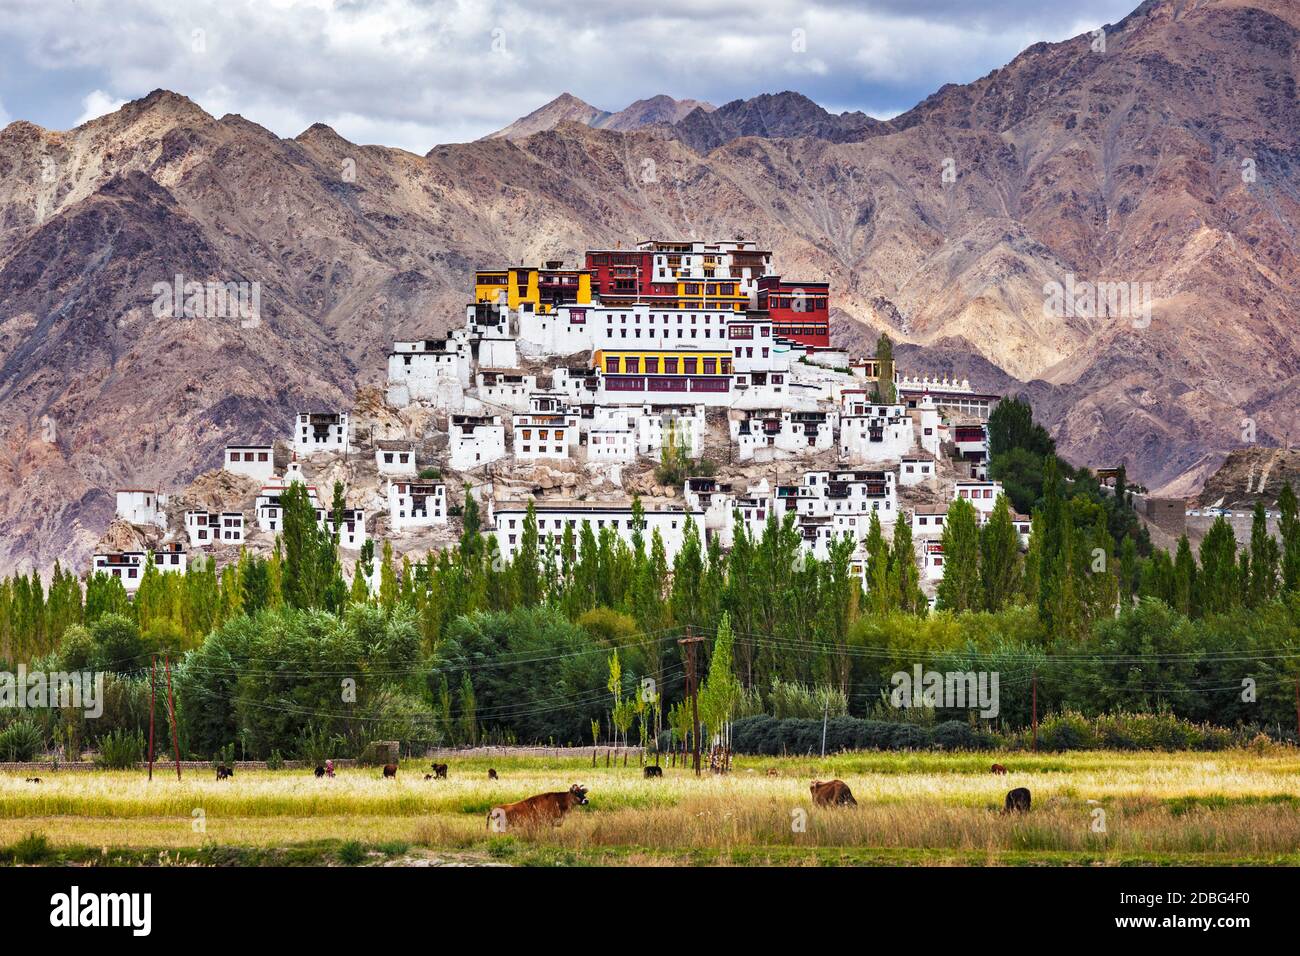 Thikse Gompa or Thikse Monastery (also transliterated from Ladakhi as Tikse, Tiksey or Thiksey) - Tibetan Buddhist monastery of the Yellow Hat (Gelugp Stock Photo